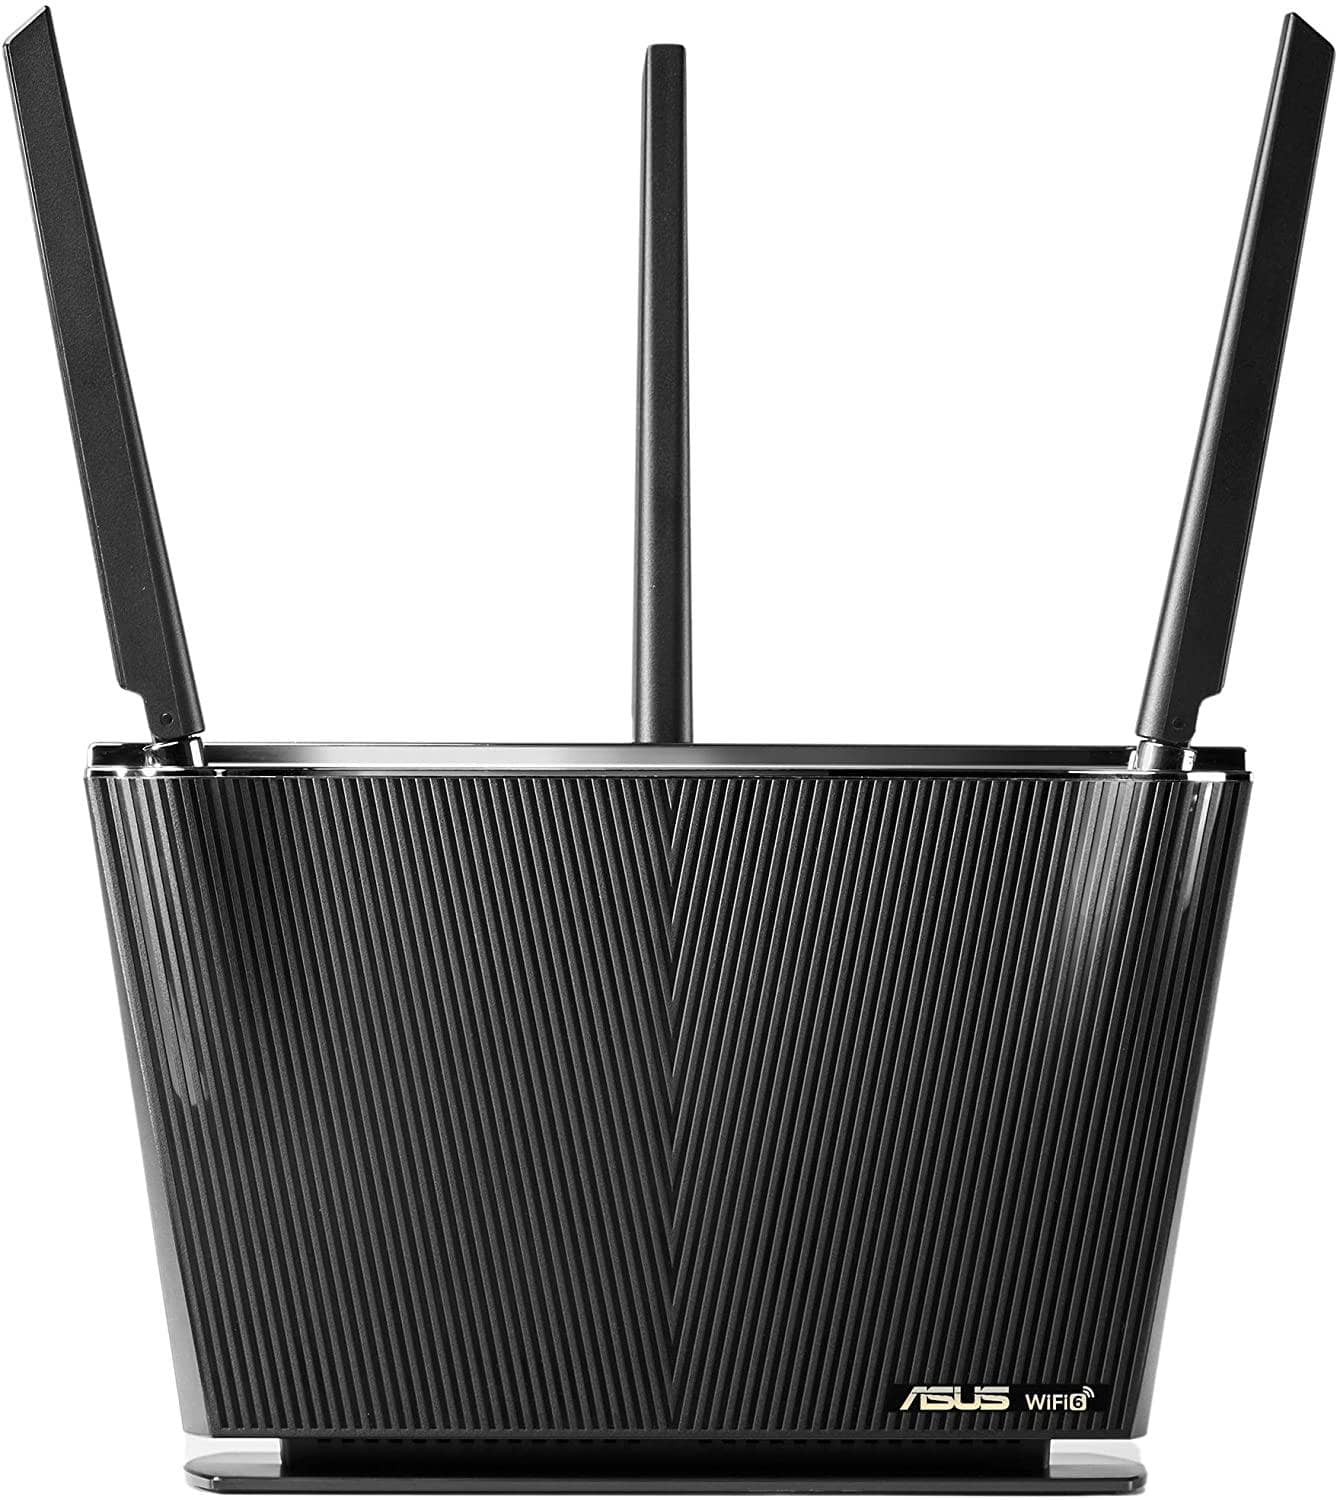 ASUS AC1750 WiFi Router (RT-AC66U B1) - Dual Band Gigabit Wireless Internet Router ASUSWRT Gaming & Streaming AiMesh Compatible Included Lifetime Internet Security Adaptive QoS Parental Control - DealYaSteal